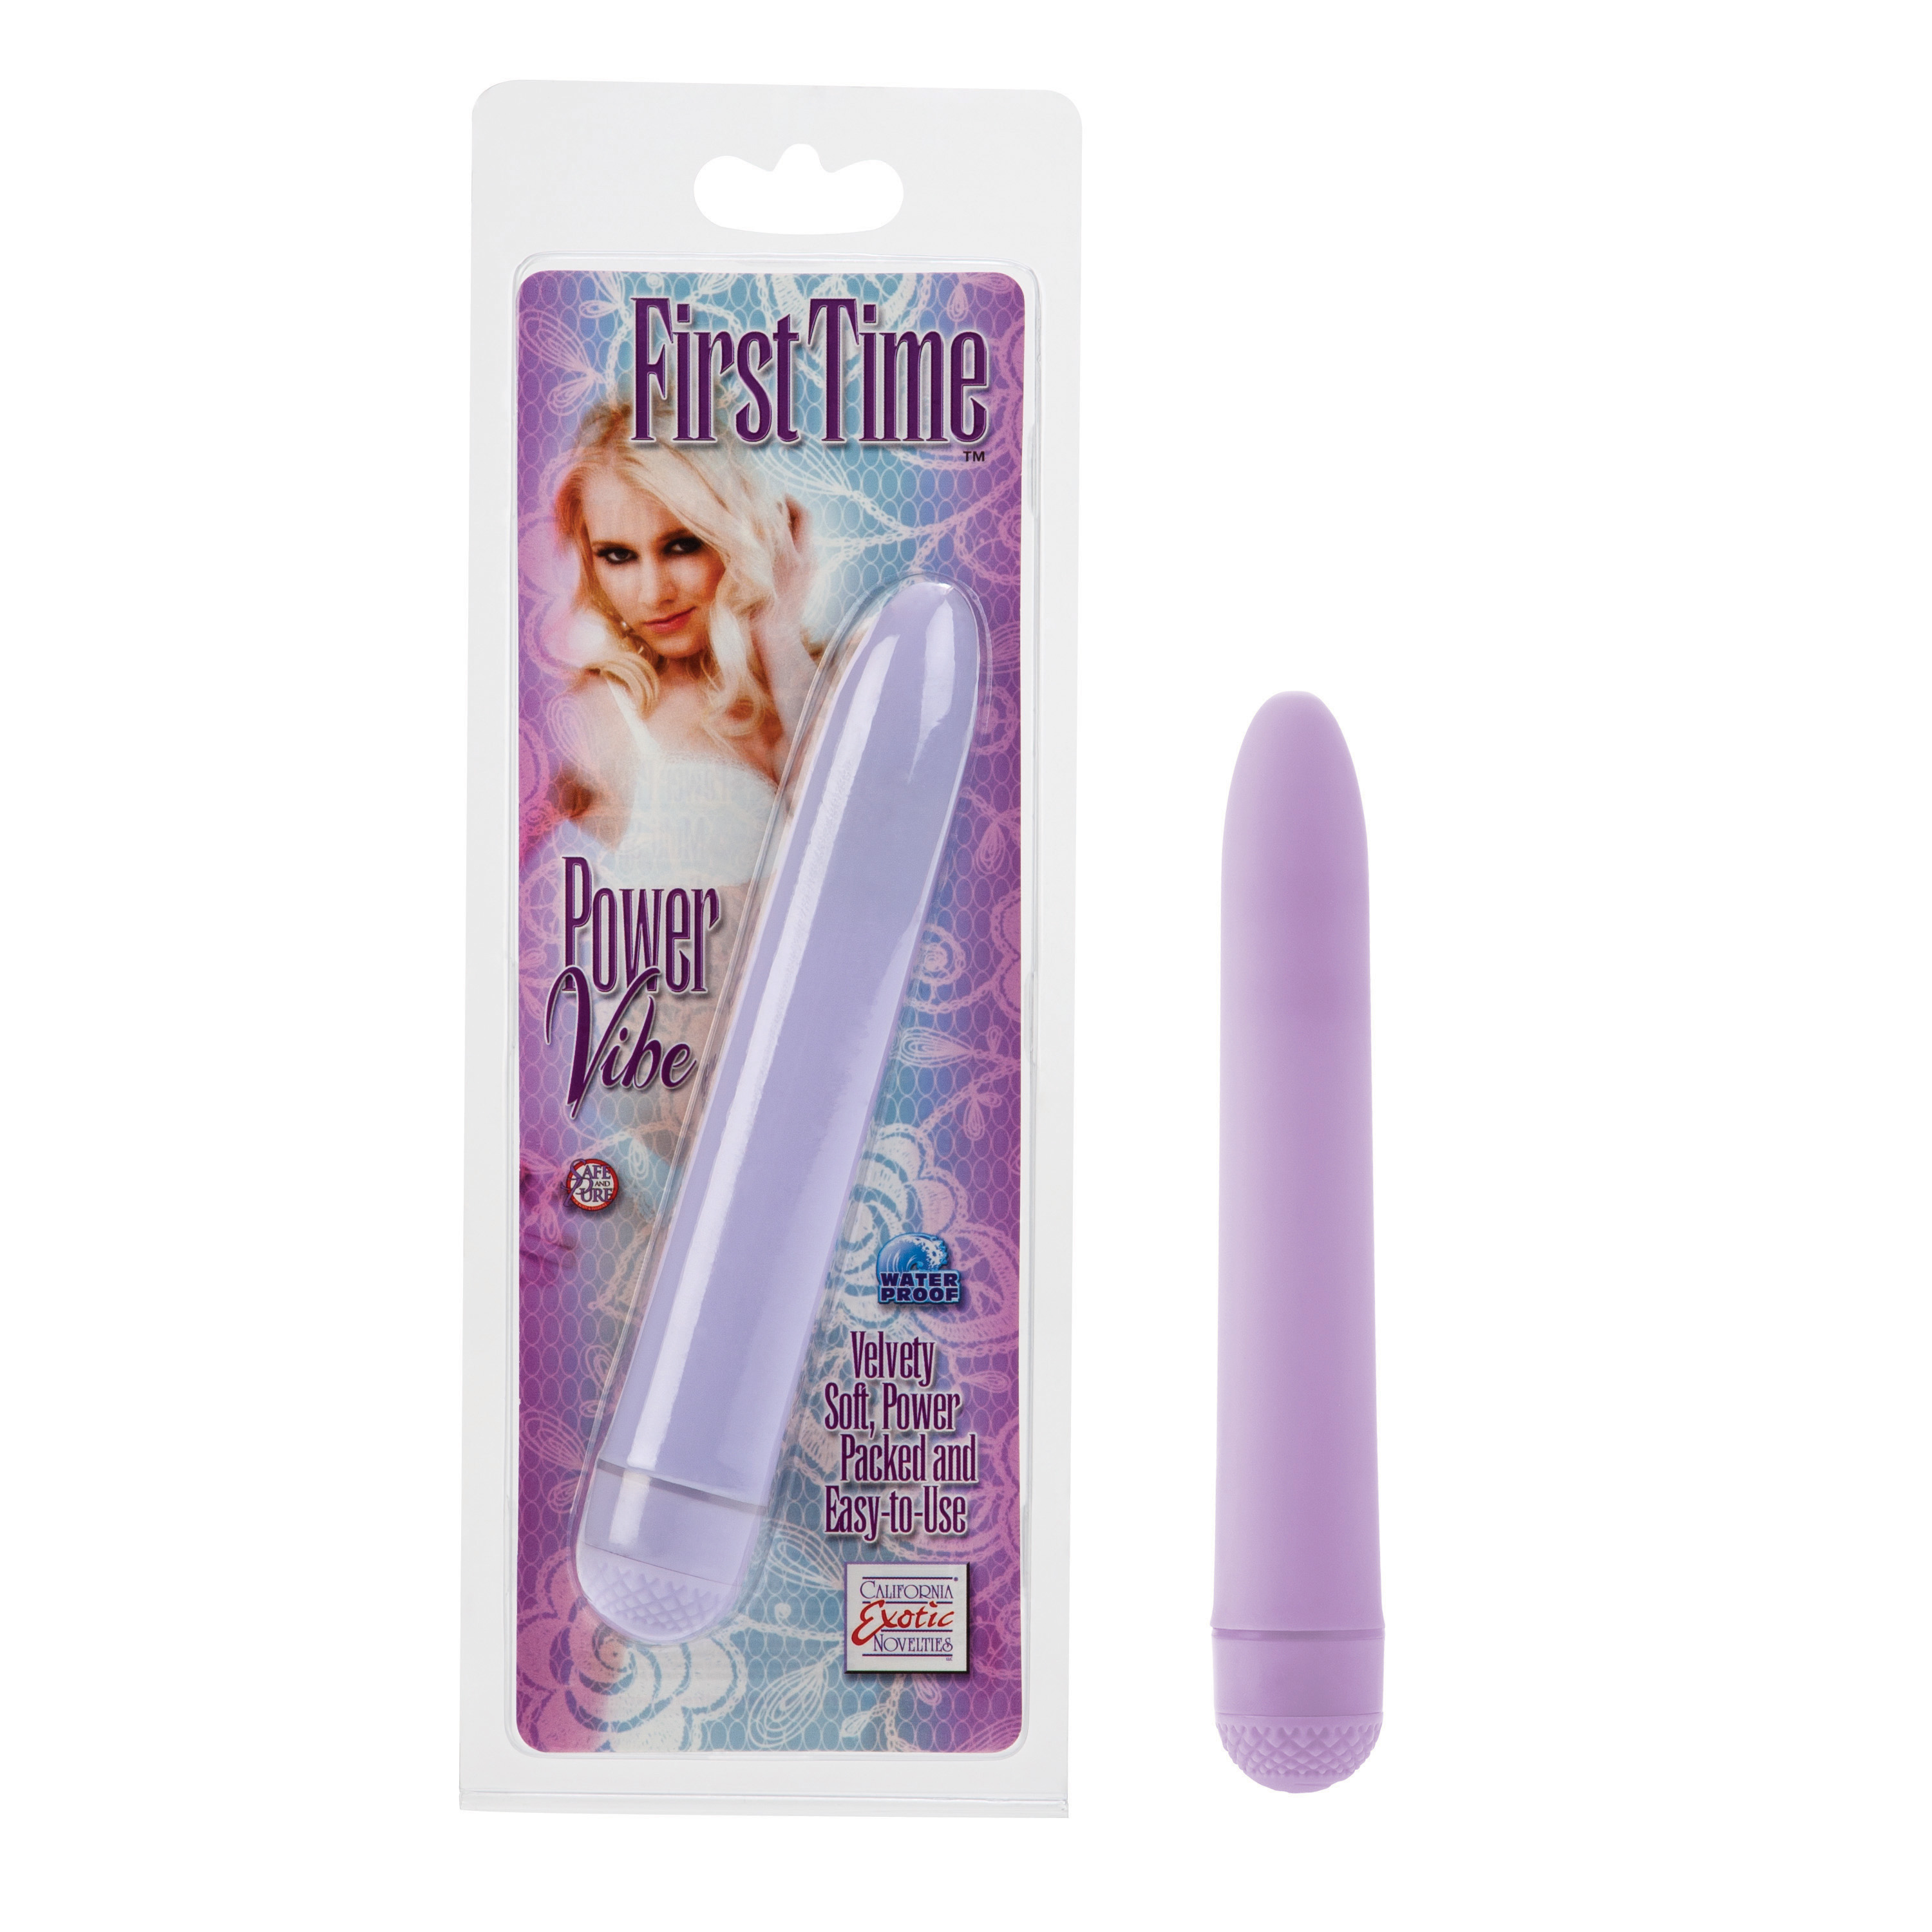 FIRST TIME POWER VIBE PURPLE - SE000409